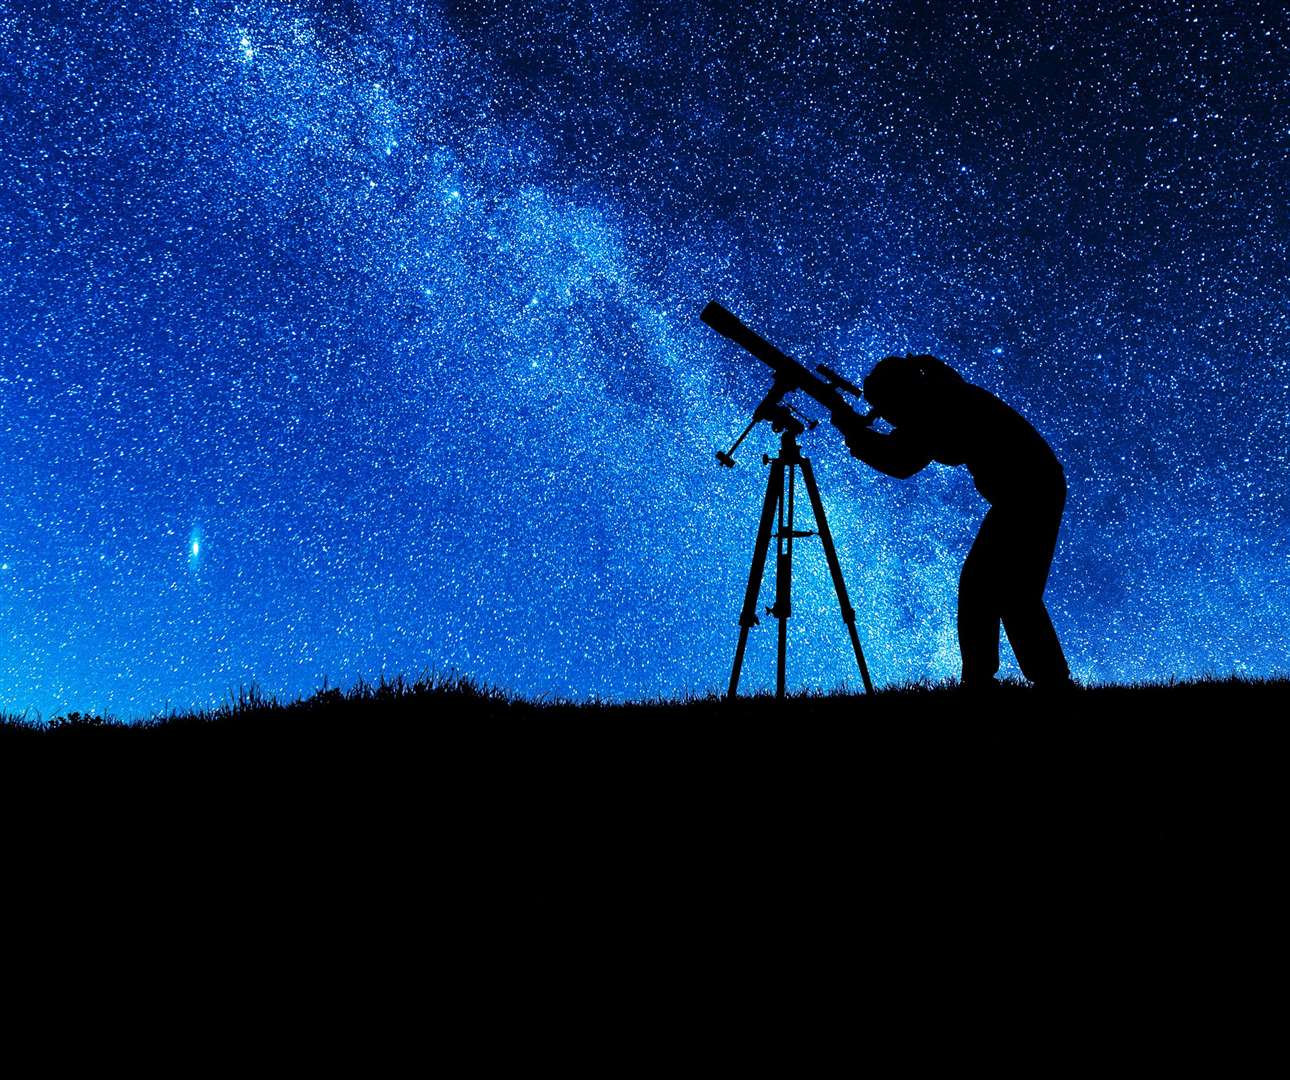 While some may be visible with the naked, telescopes and binoculars may help